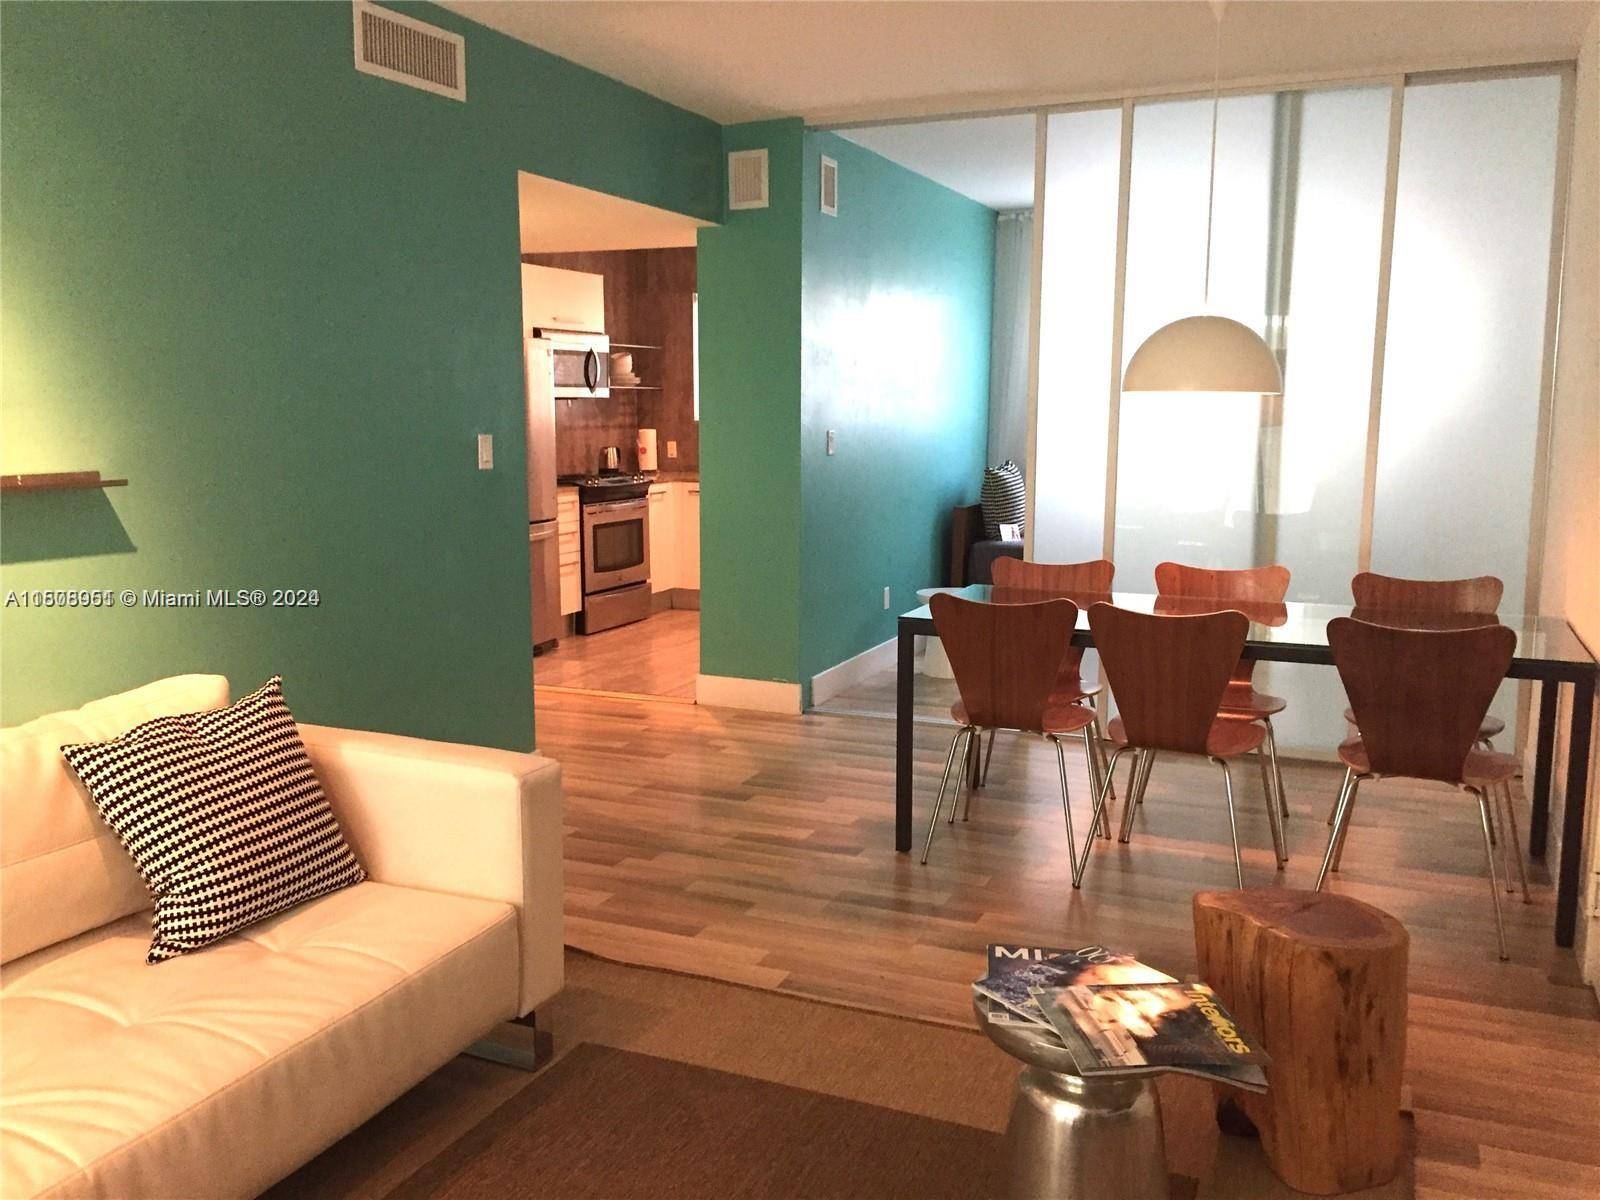 Condo Hotel in the heart of South Beach fully furnished and equipped.